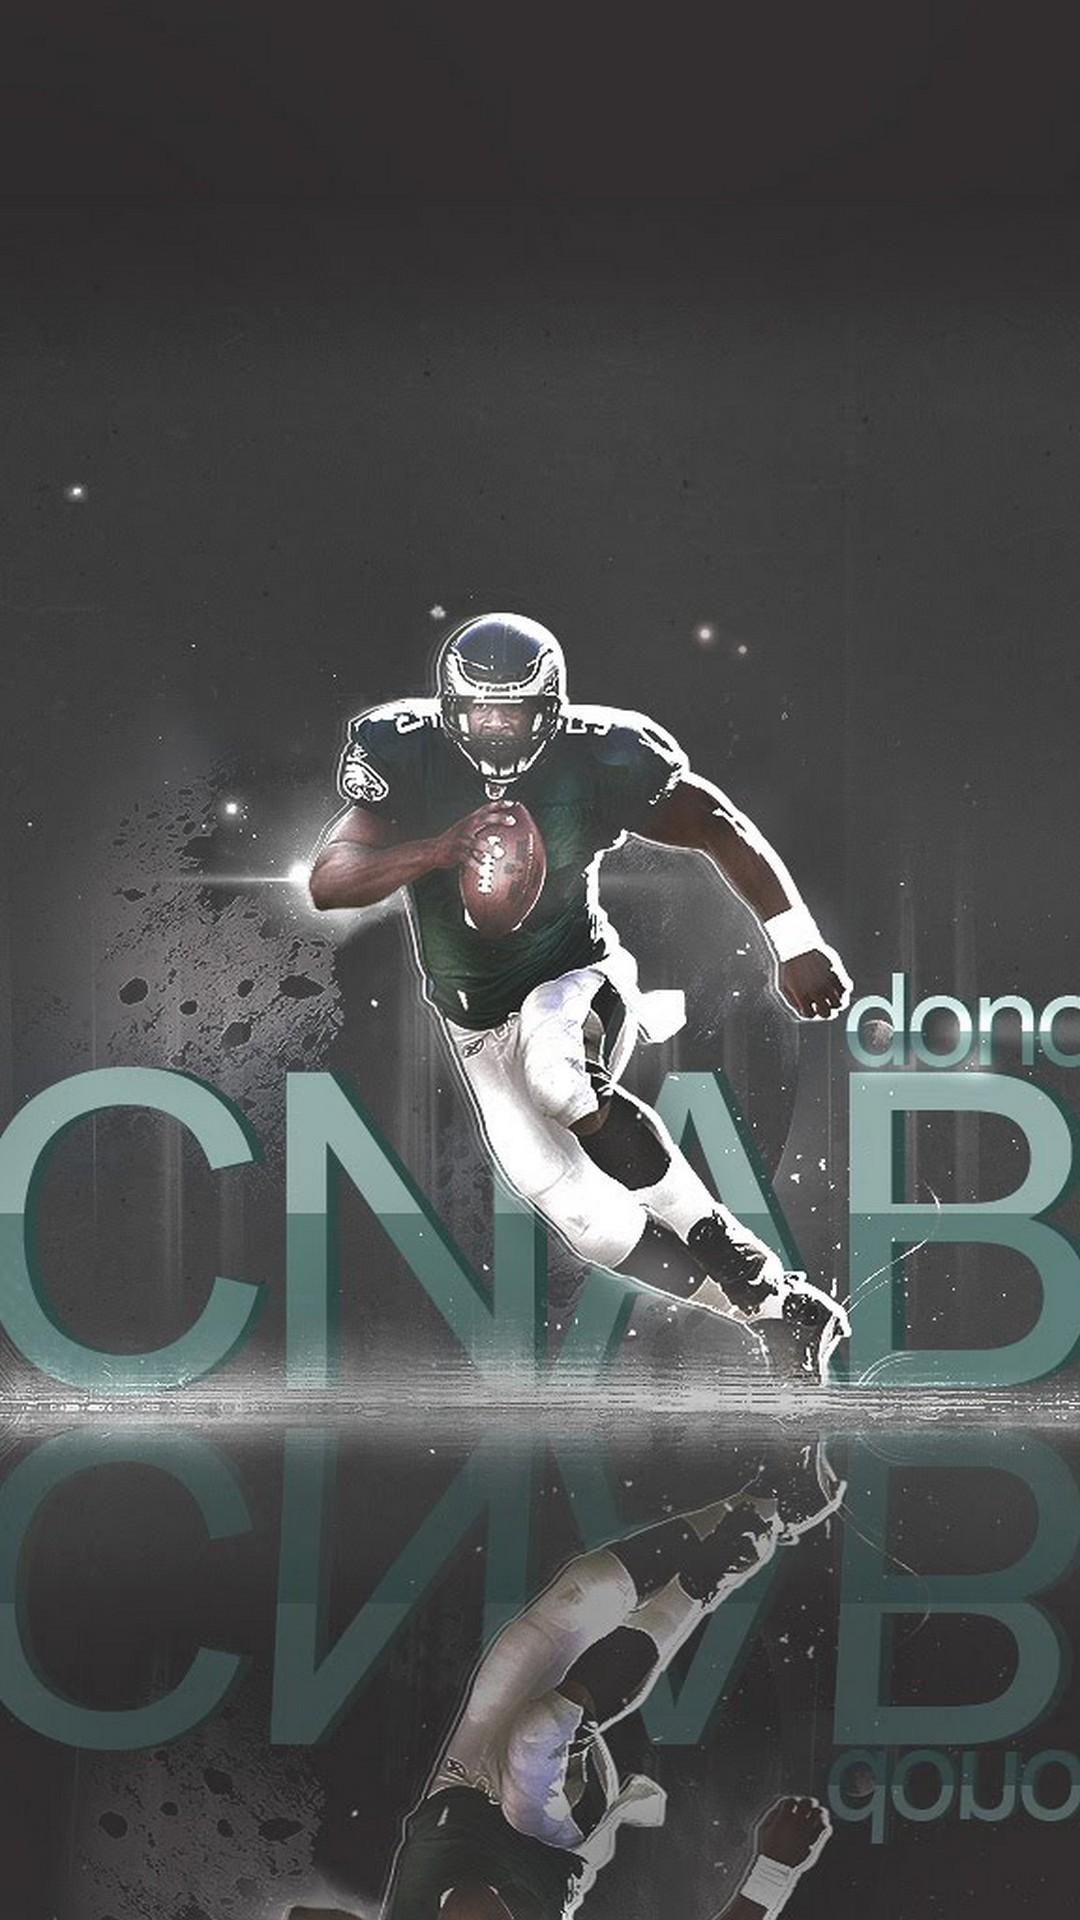 NFL Eagles HD Wallpaper For iPhone NFL Football